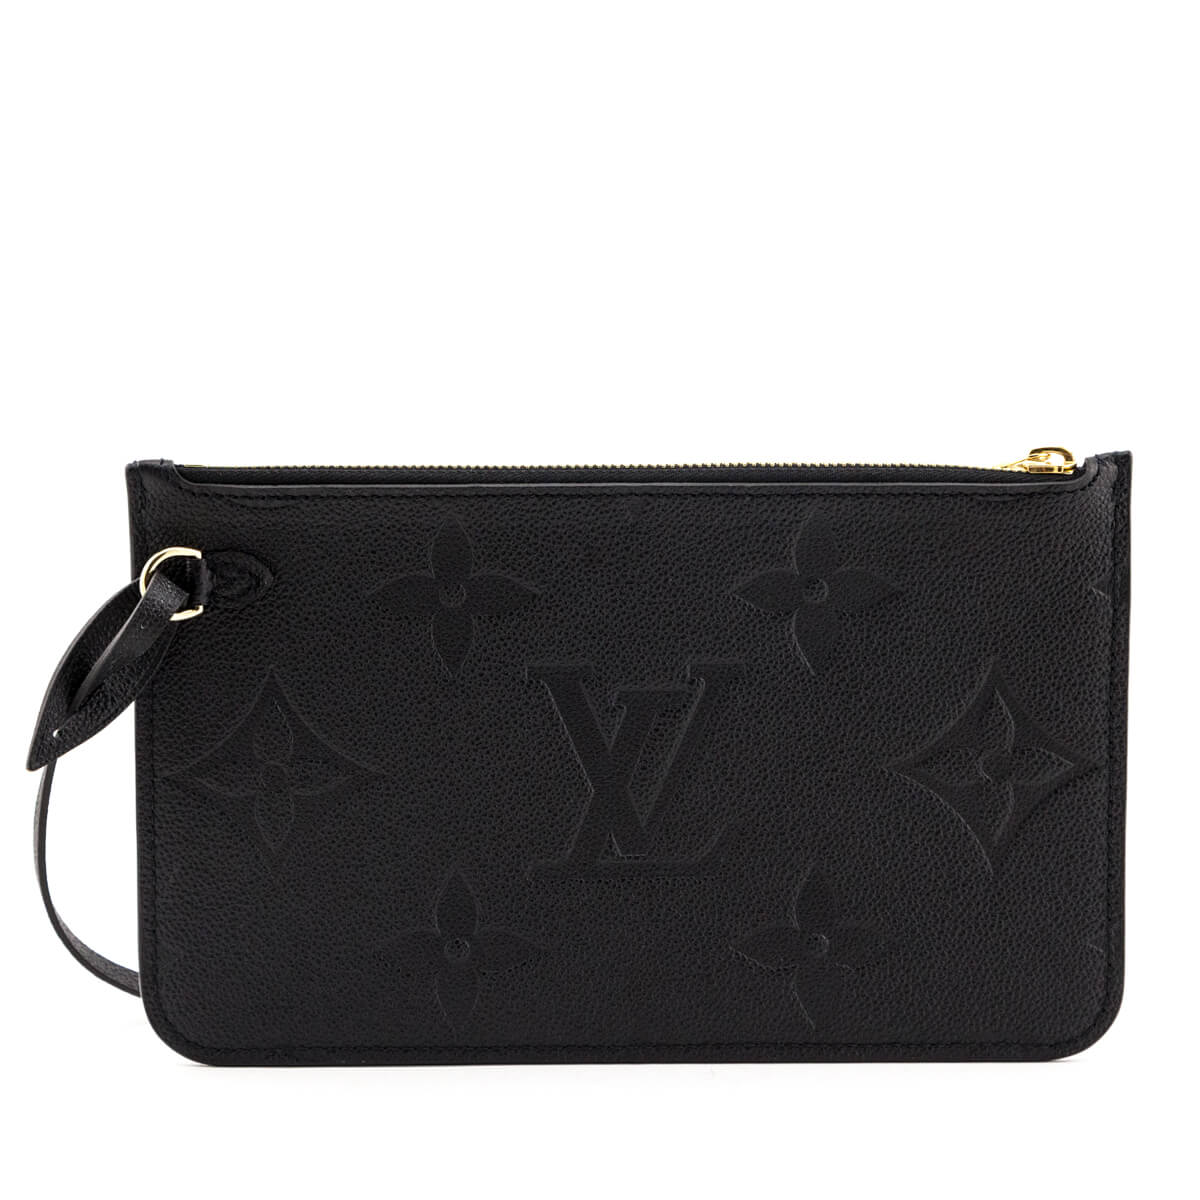 Neverfull leather handbag Louis Vuitton Black in Leather - 31319581